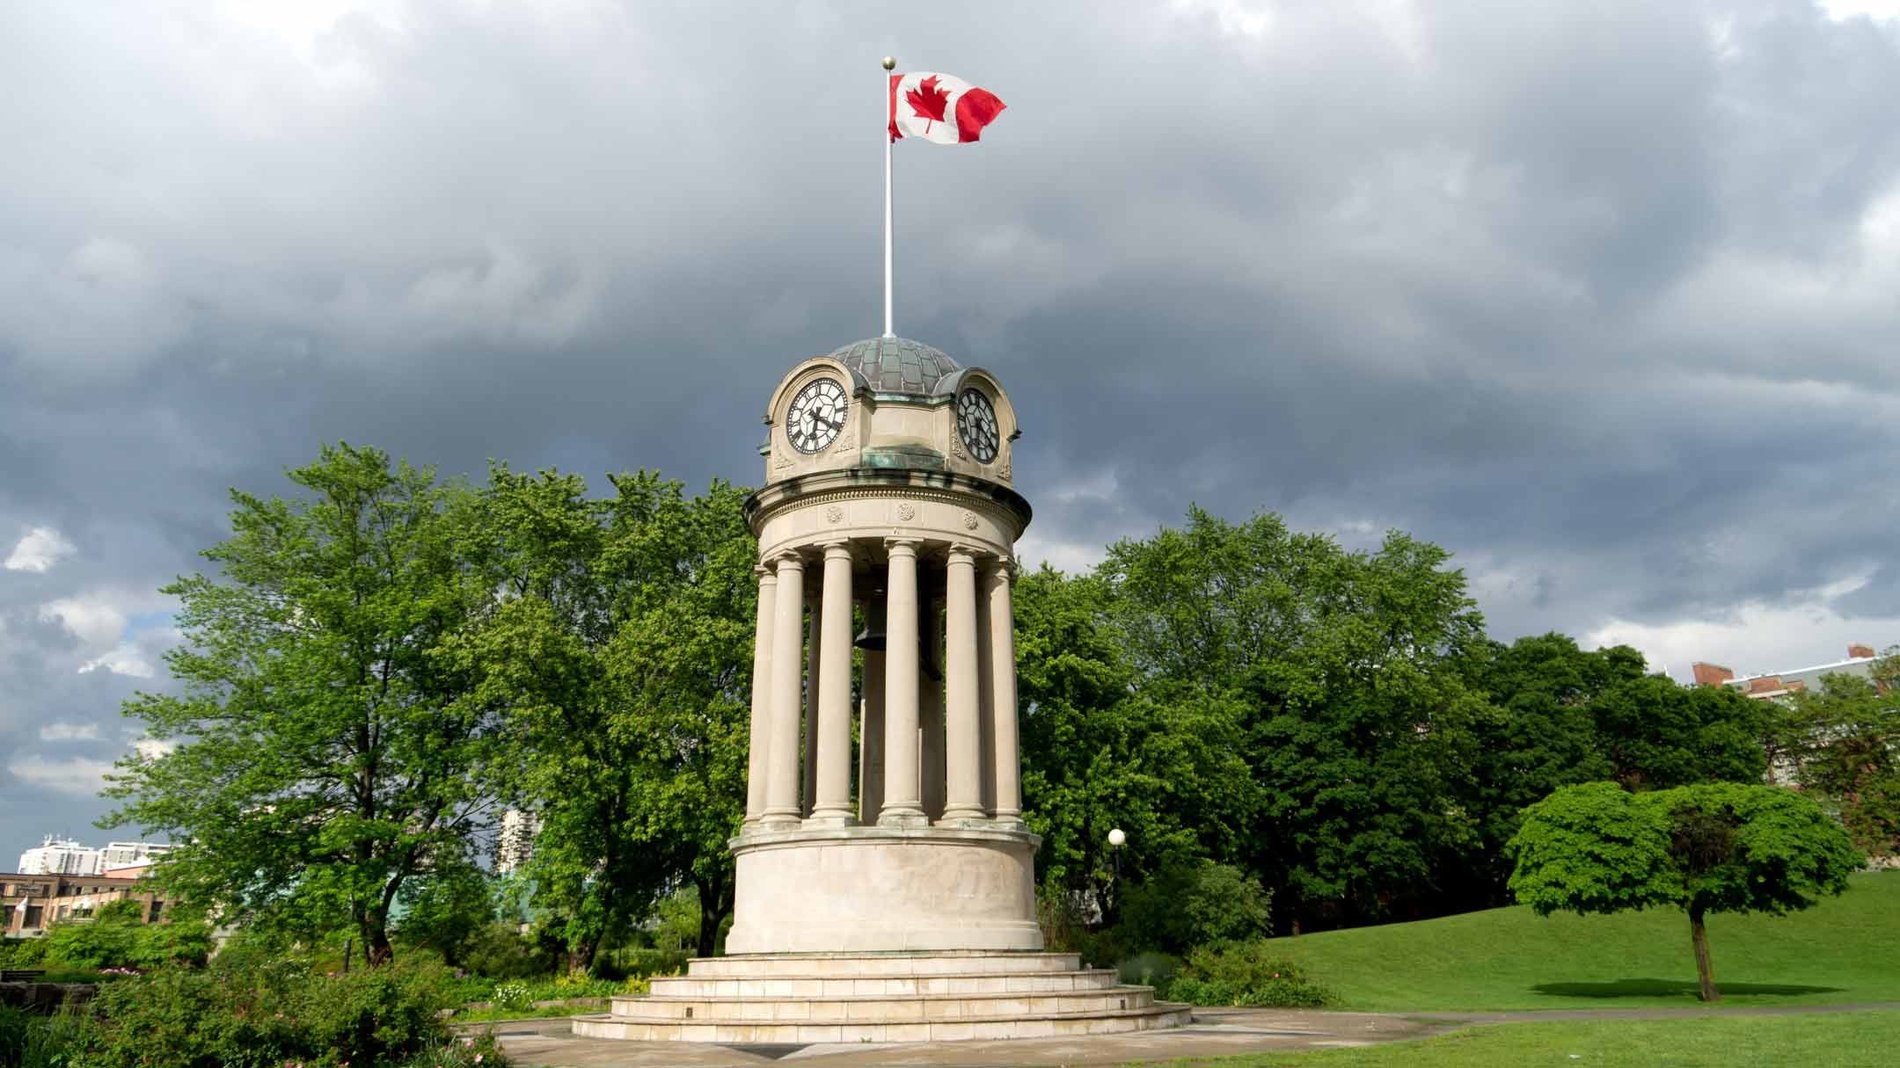 The Canadian flag on top of a clock tower in Kitchener's Victoria Park